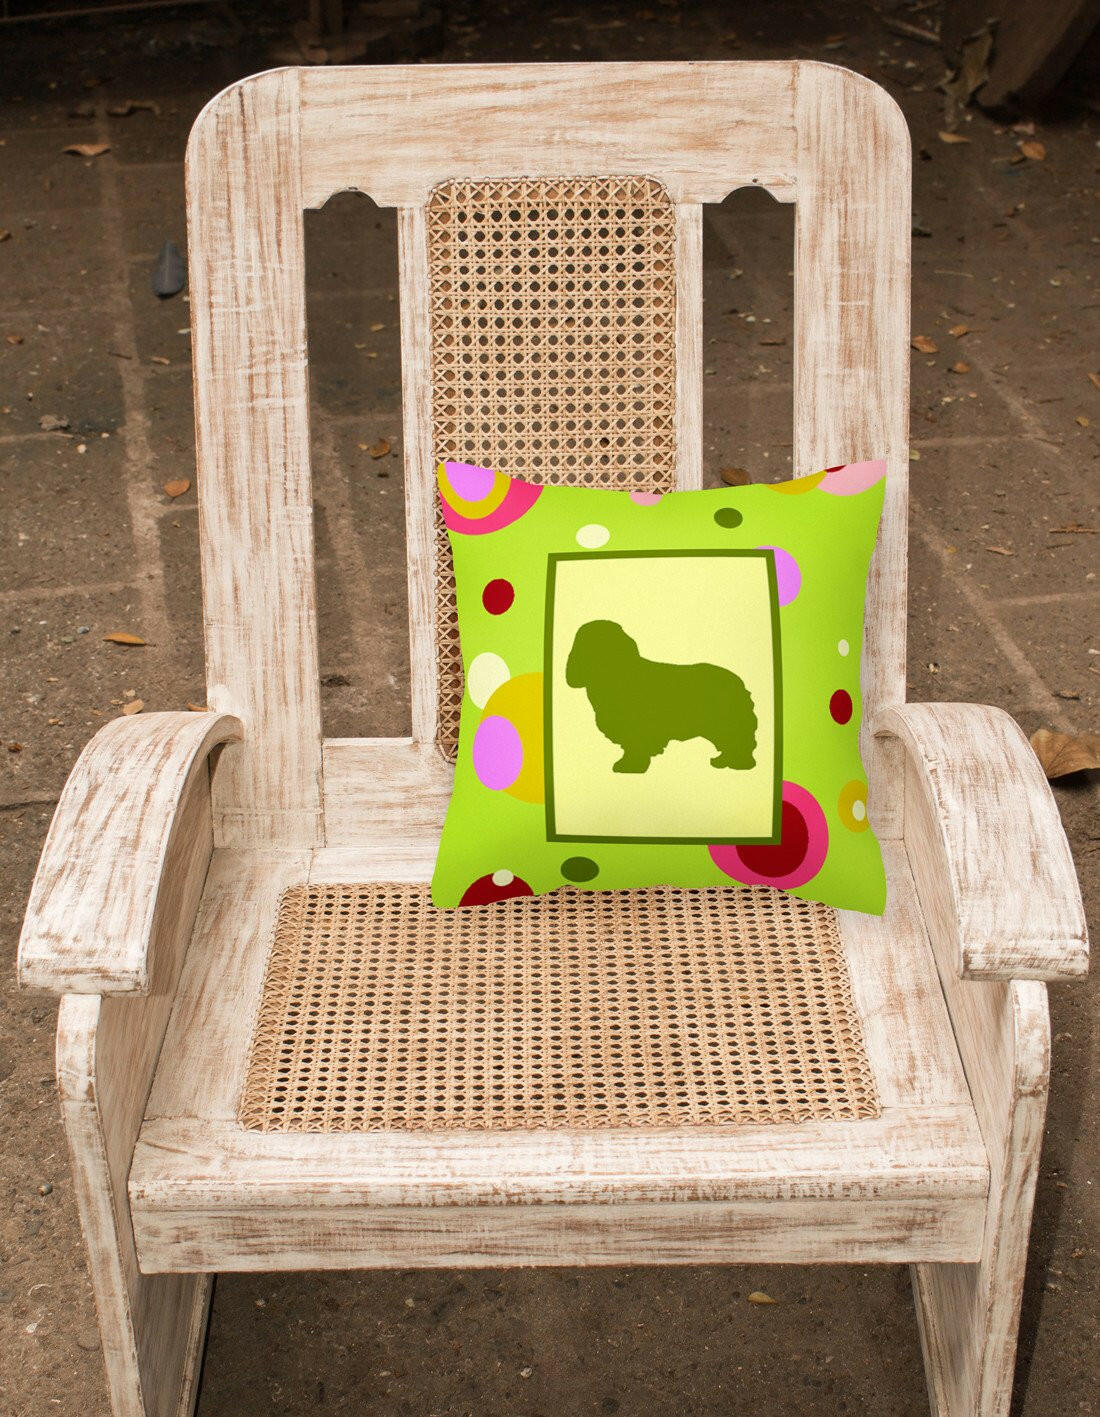 Lime Green Dots Cavalier Spaniel Fabric Decorative Pillow CK1097PW1414 by Caroline's Treasures